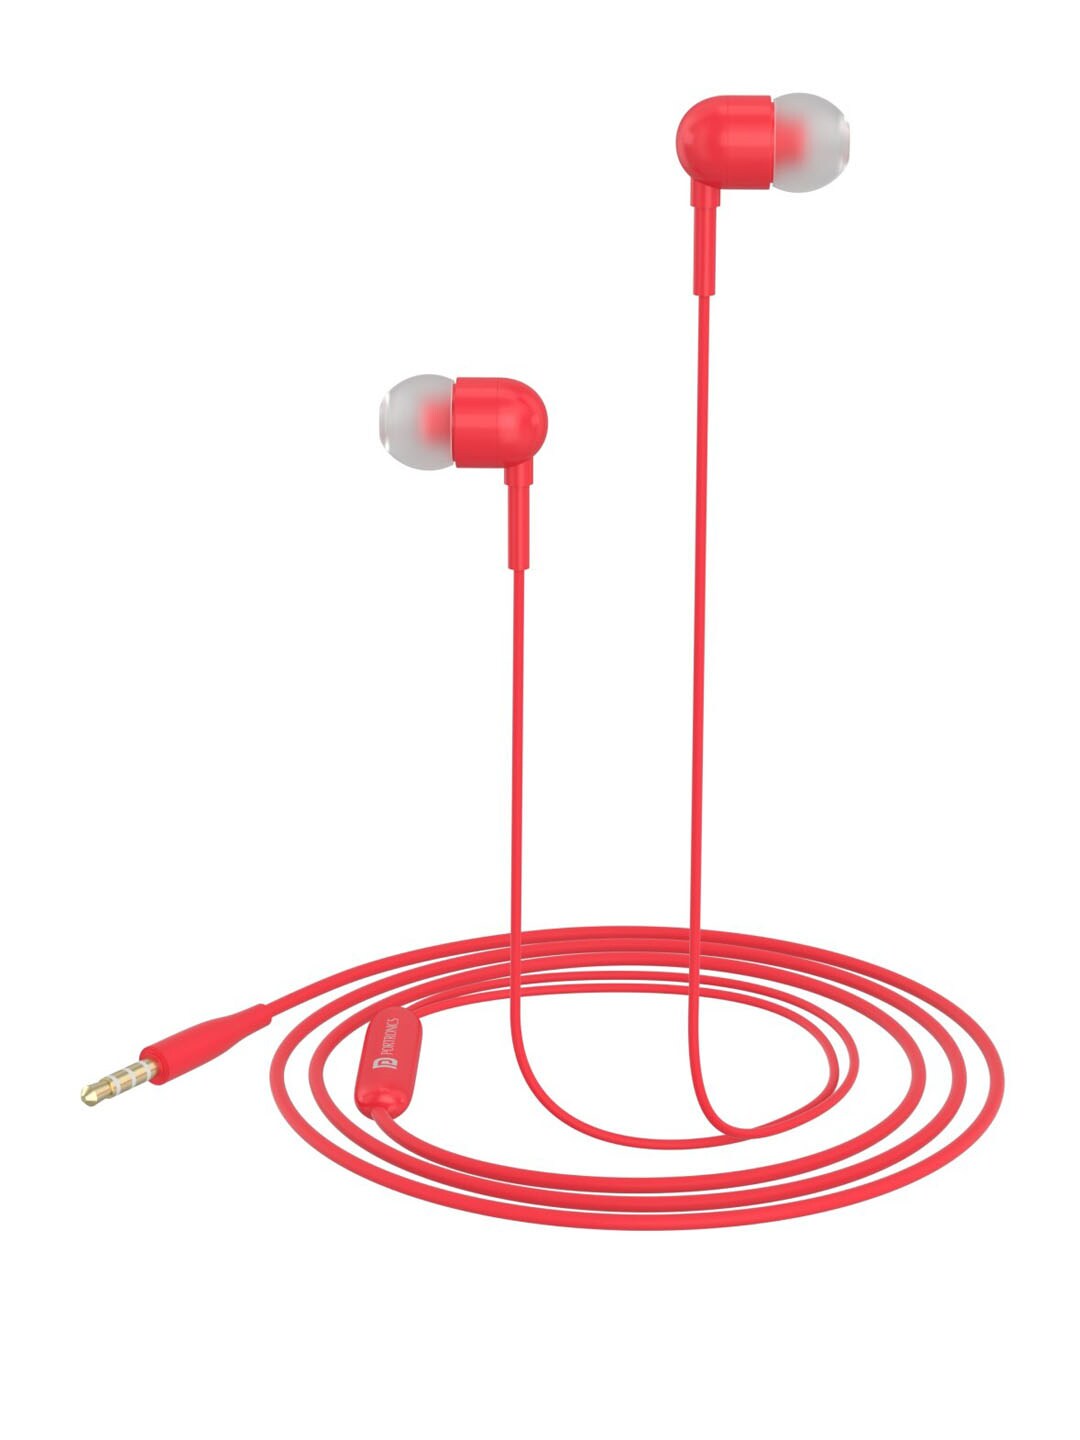 Portronics Red Solid Conch 50 in-Ear Wired Earphone Price in India